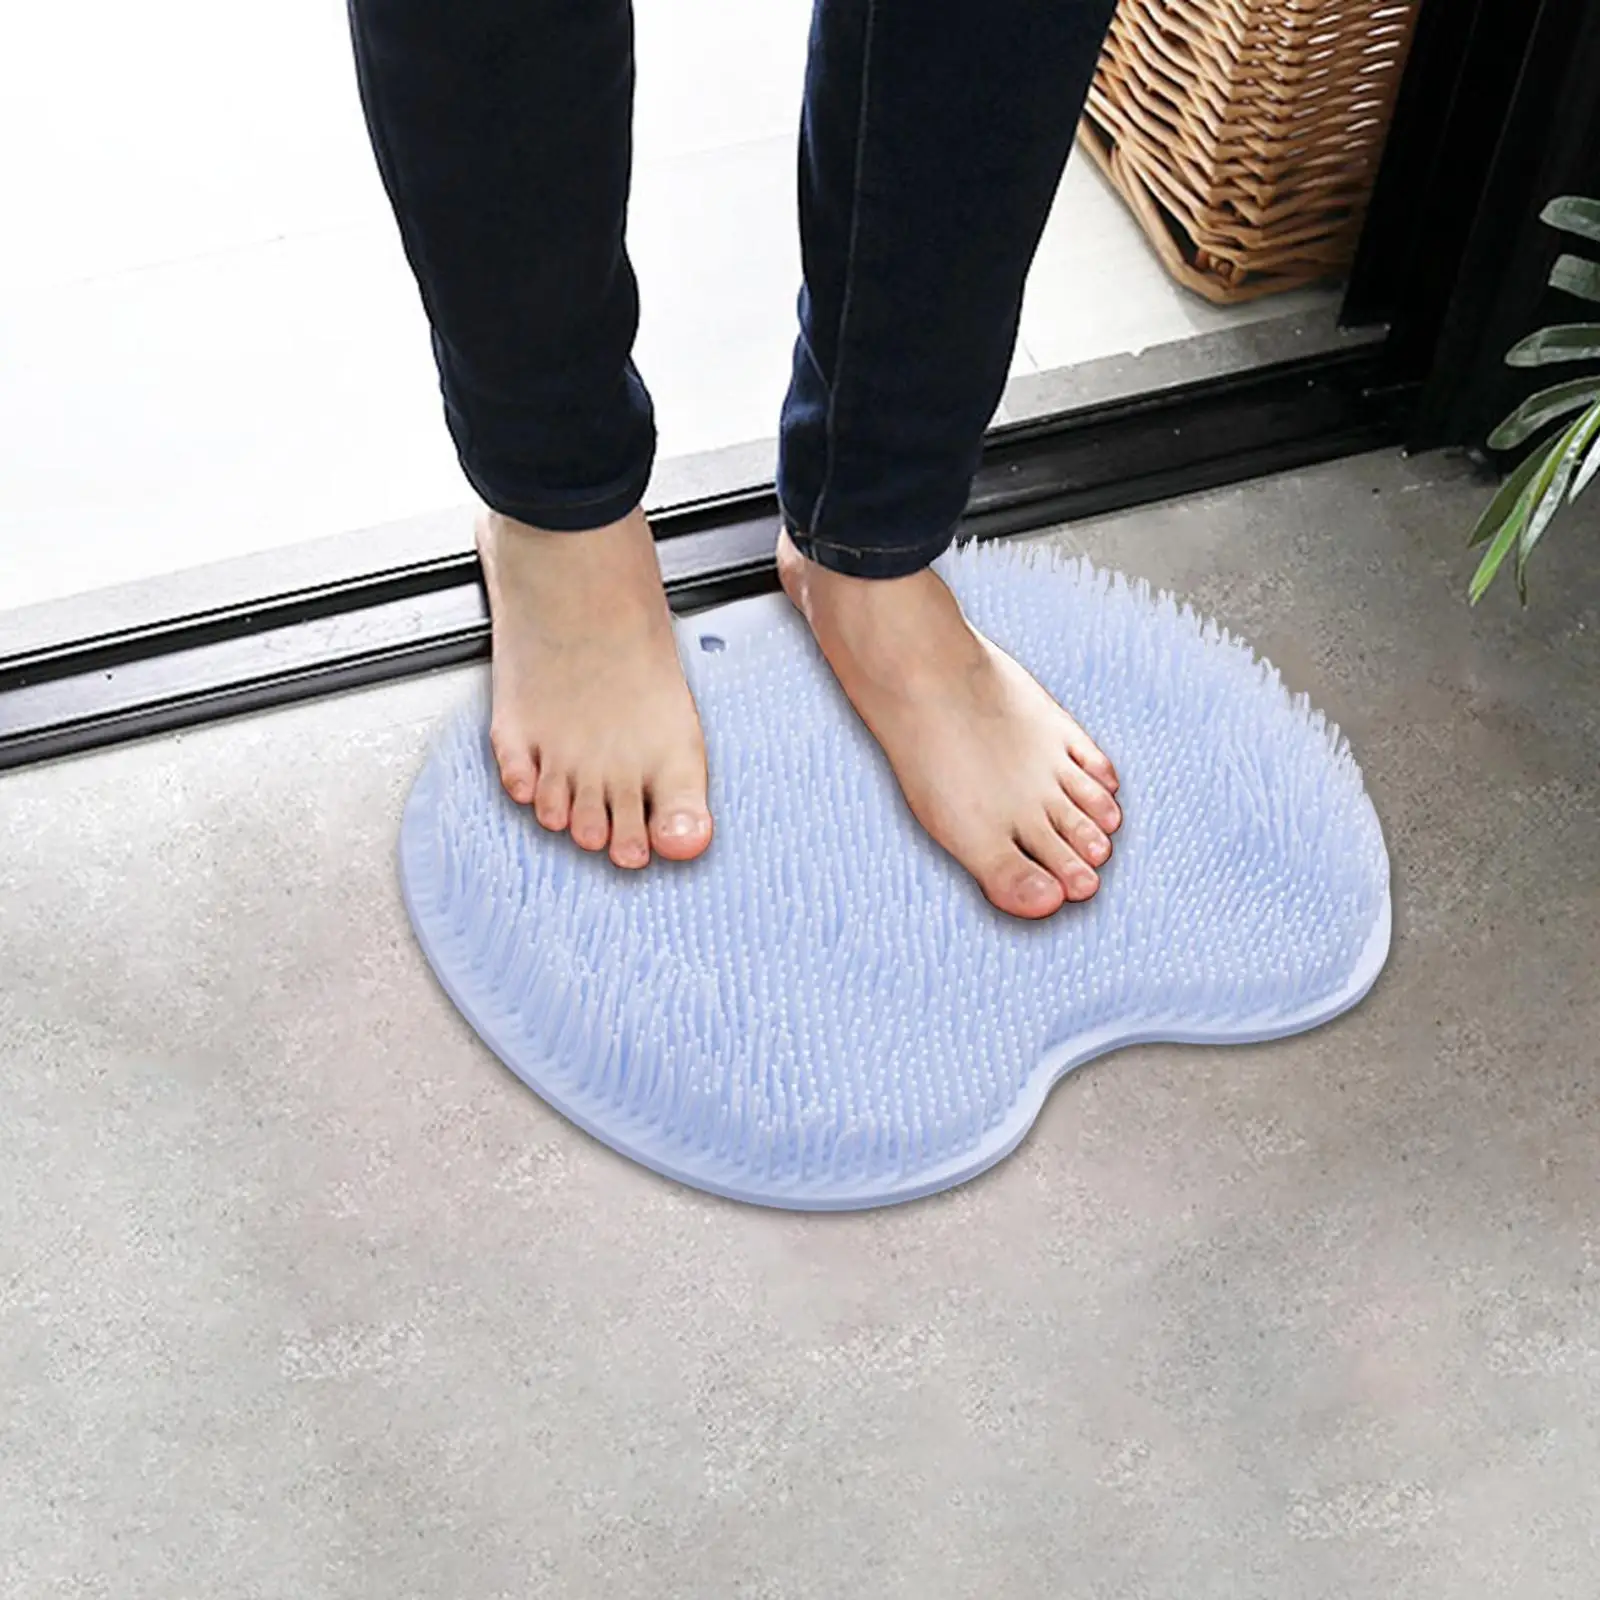 Non  Shower Foot Scrubber Foot Tub Scrubber Cleaner Sturdy  for Exfoliing 